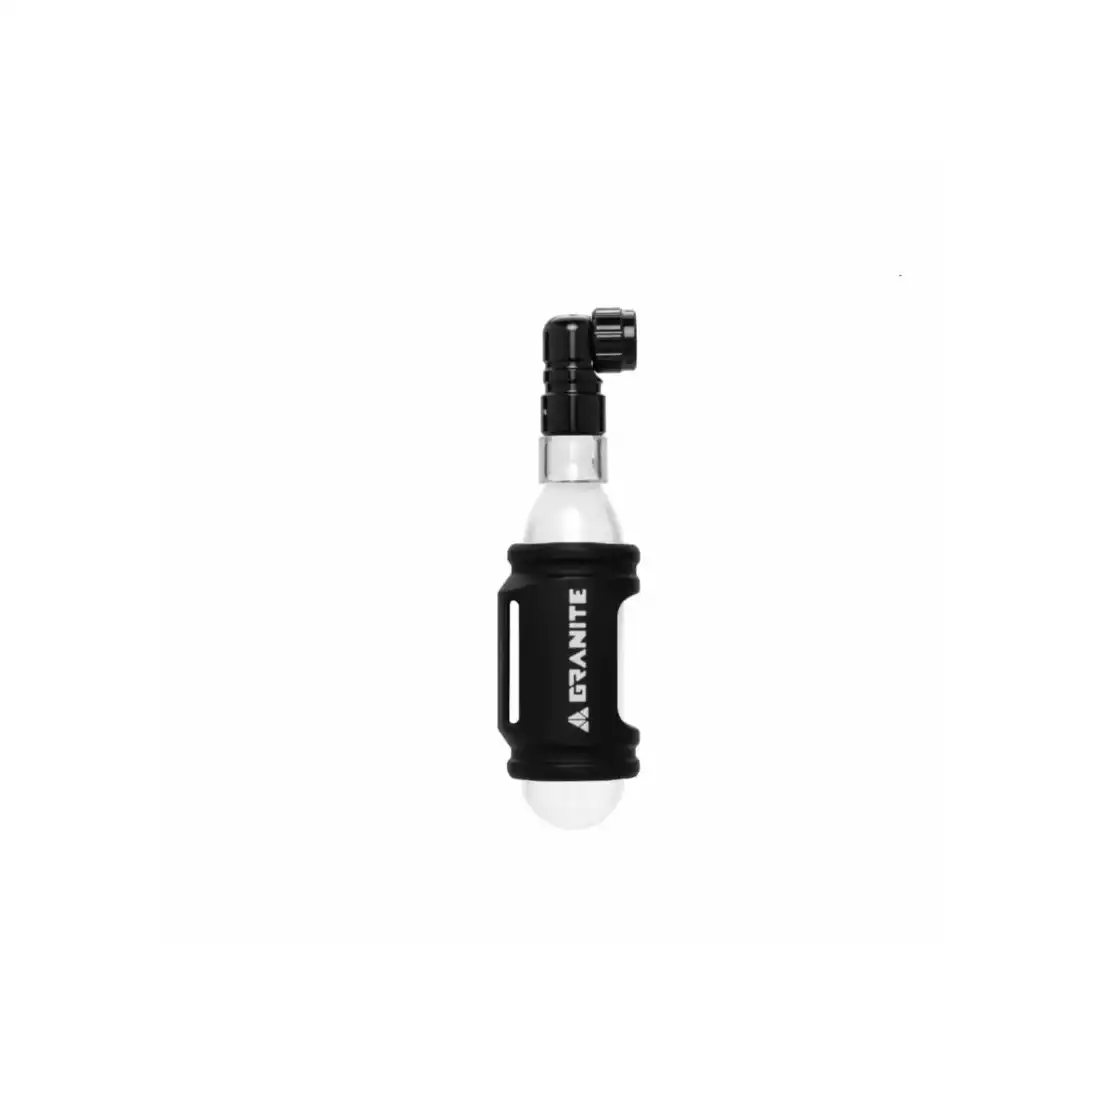 GRANITE CO2 Punk Bicycle pump with silicone, 16g cartridge